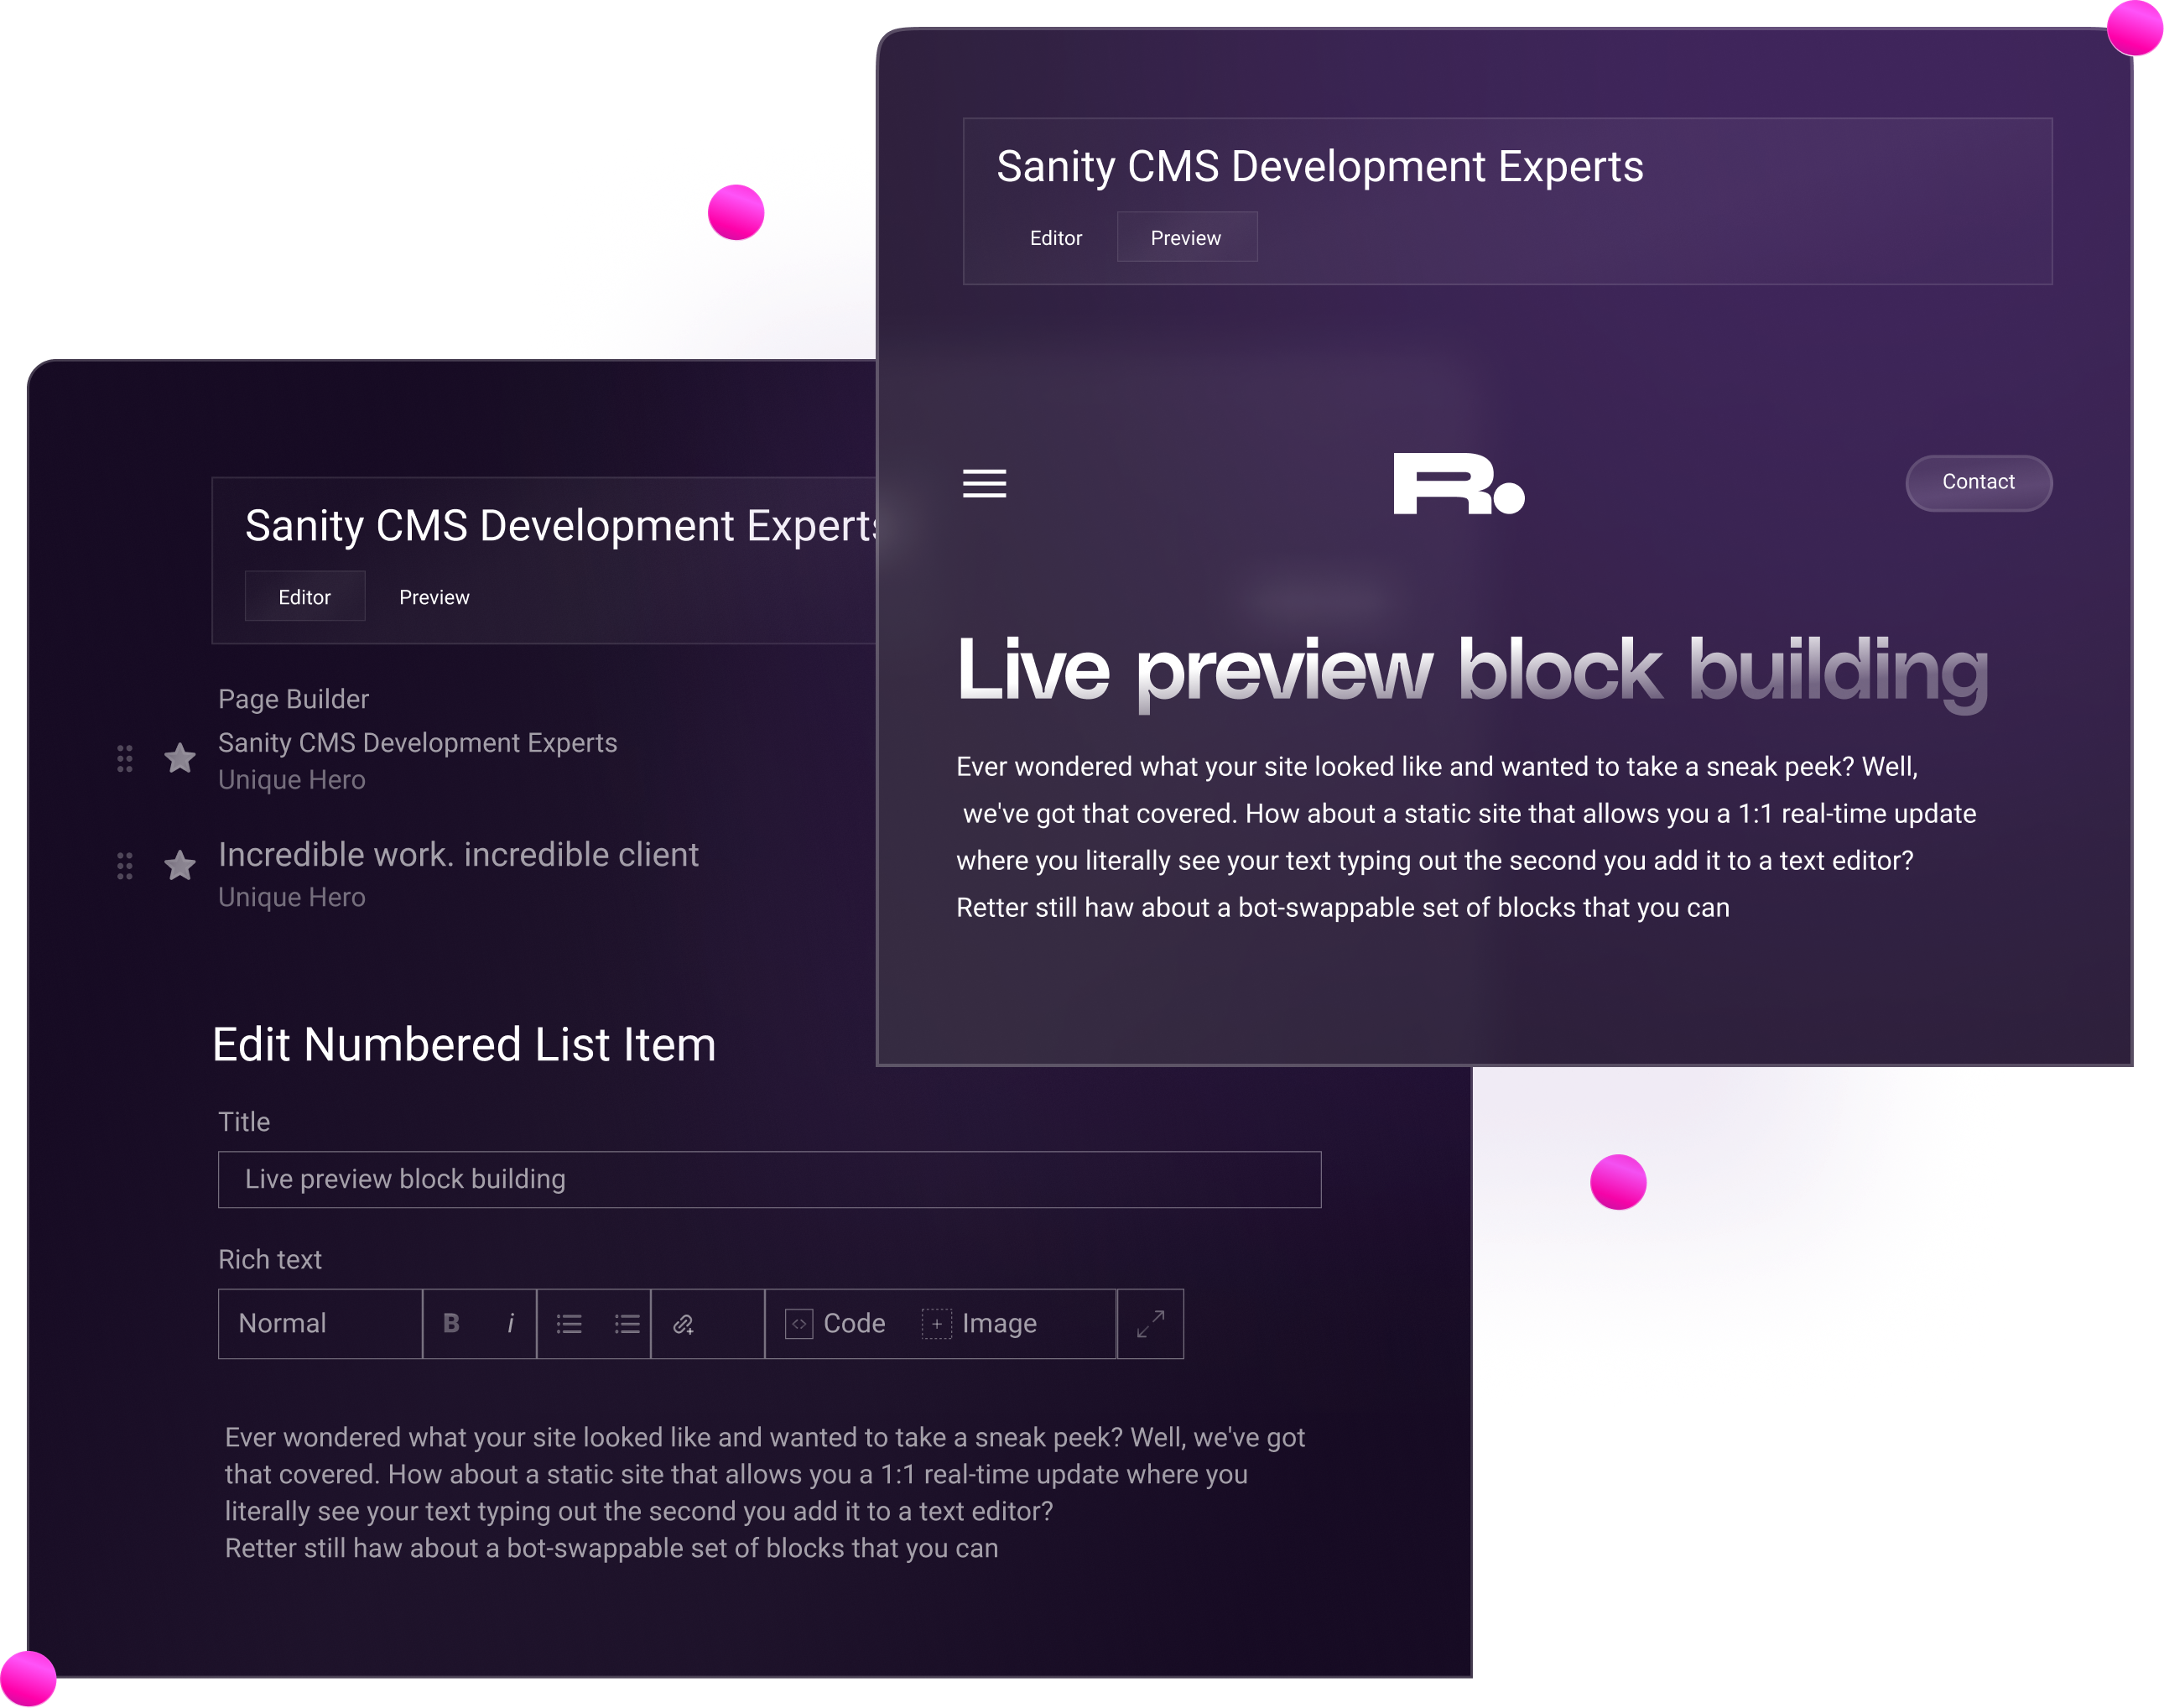  Live preview block building in Sanity